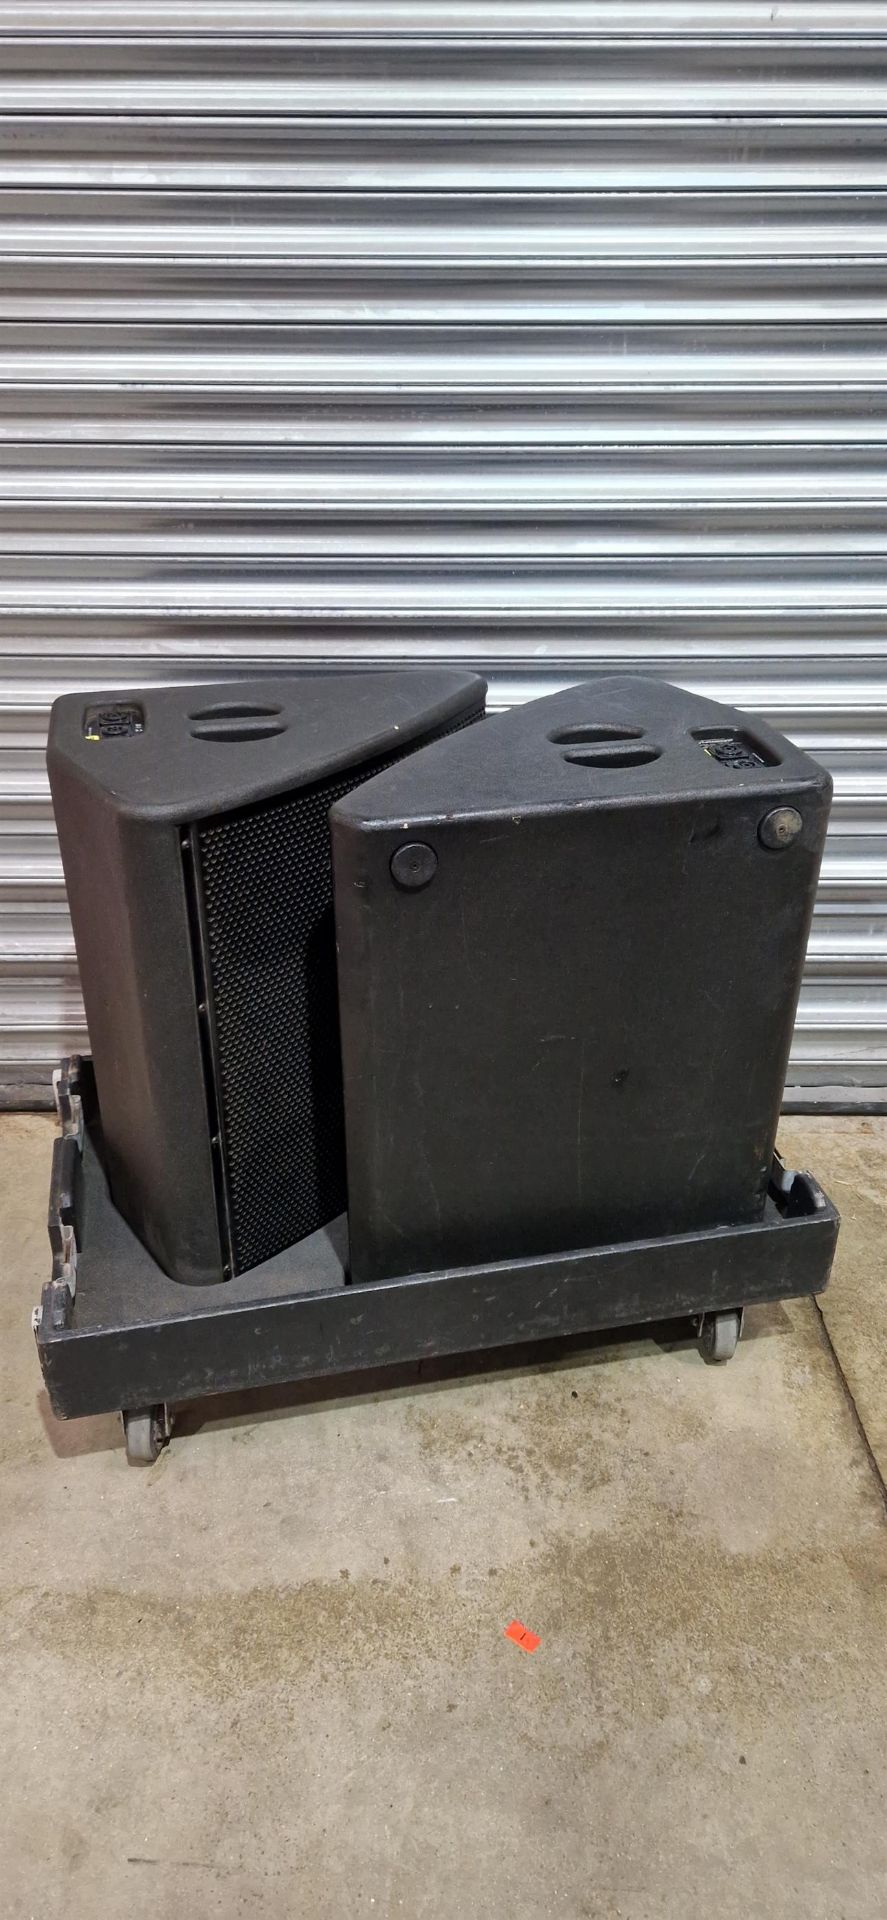 A Pair of Turbosound TFM-560 bi-amped floor monitors in Flight Case (located at Production Hire, - Image 3 of 6